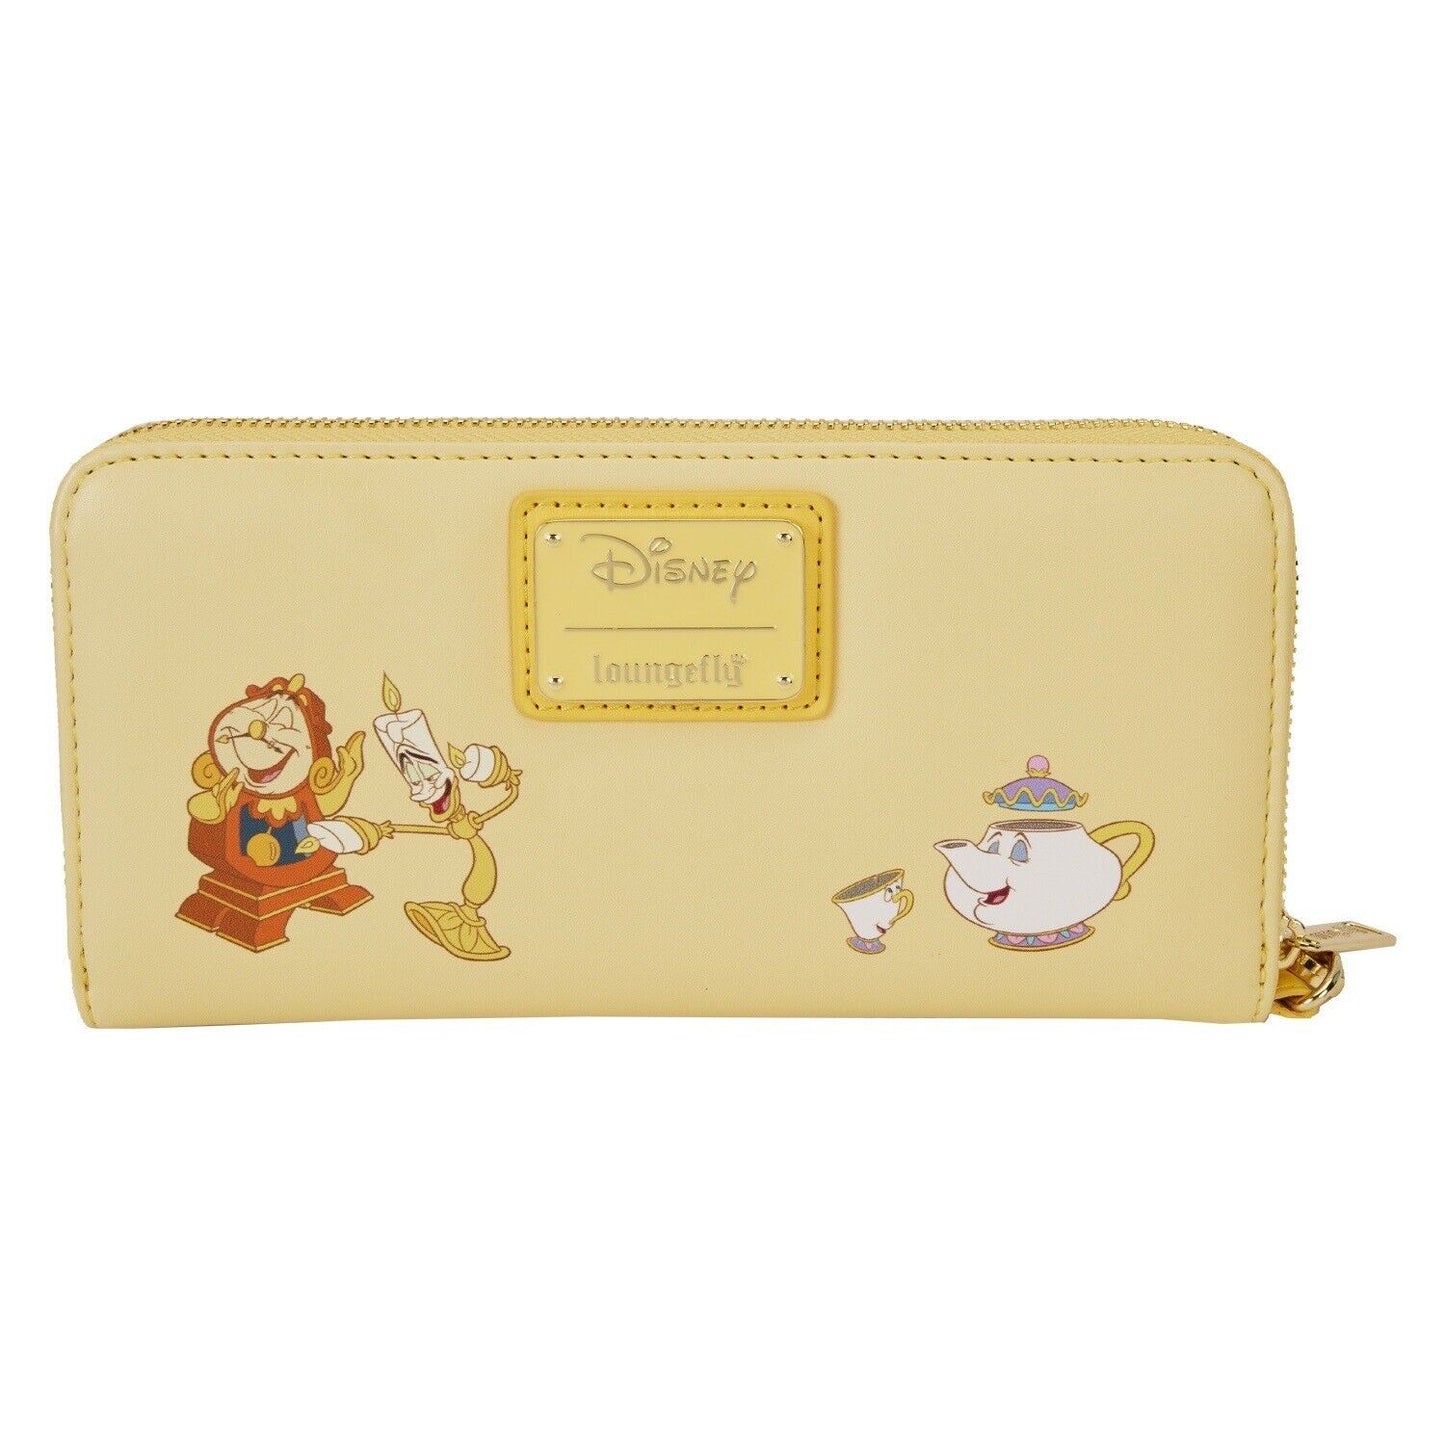 Beauty And The Beast Lenticular LOUNGEFLY Wallet New With Tags